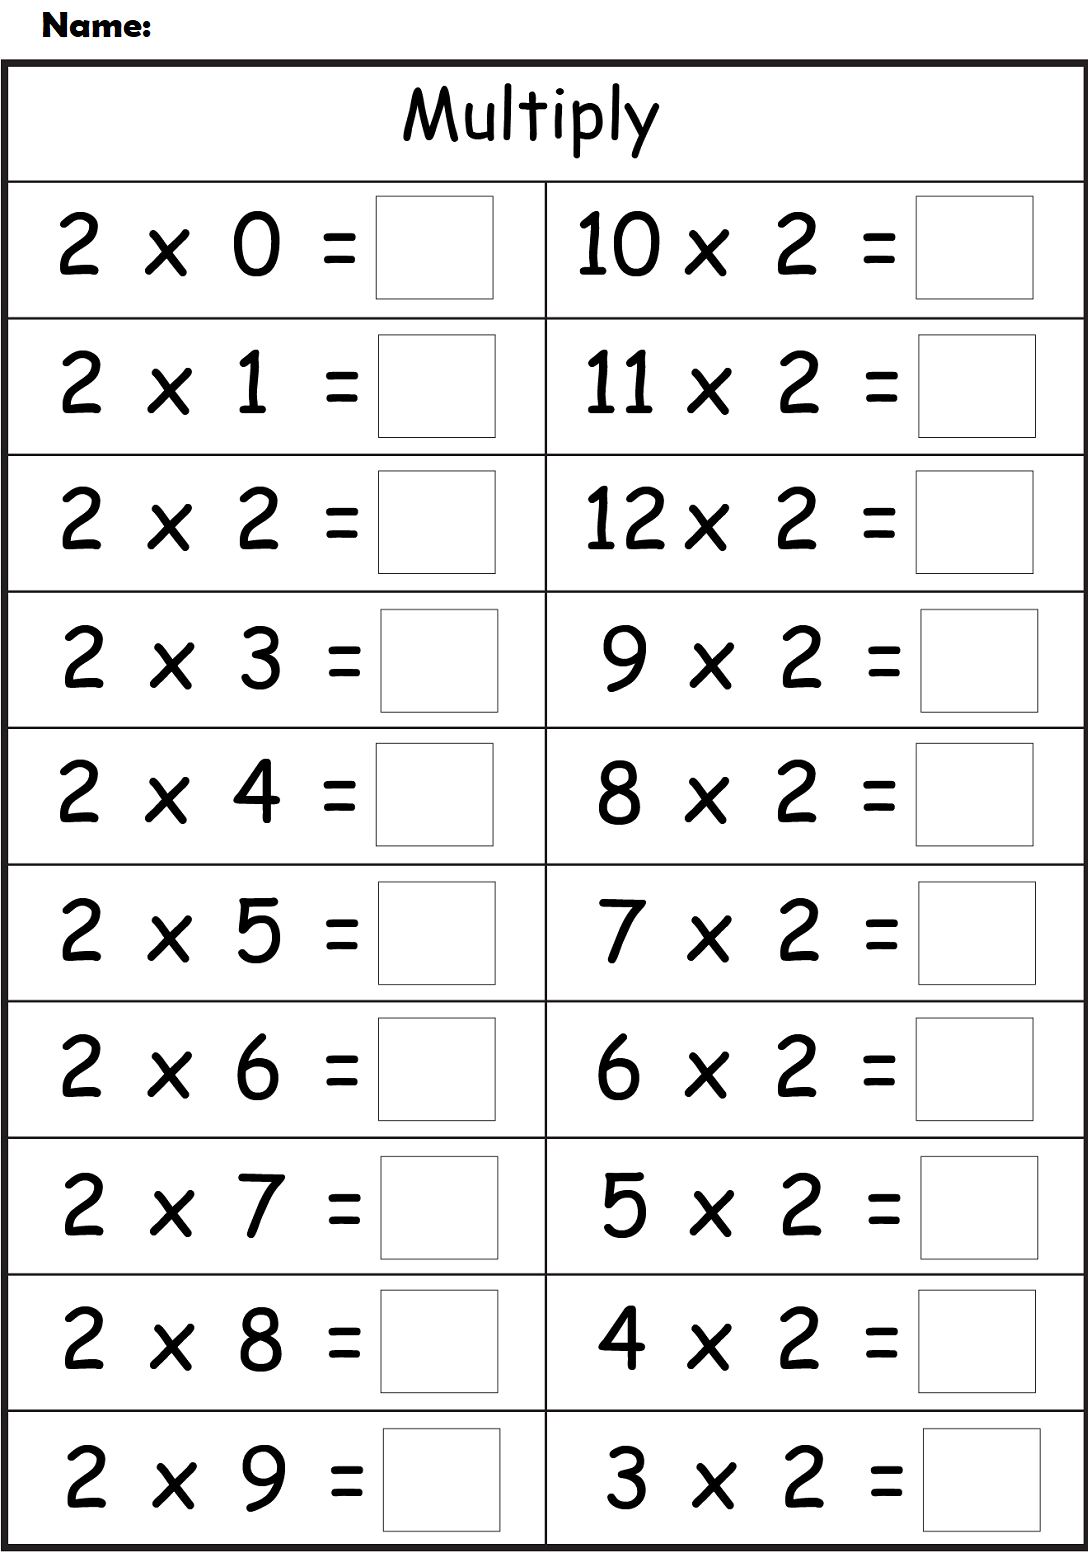 2 Times Table Worksheets | Printable Shelter pertaining to Printable 2 Multiplication Table